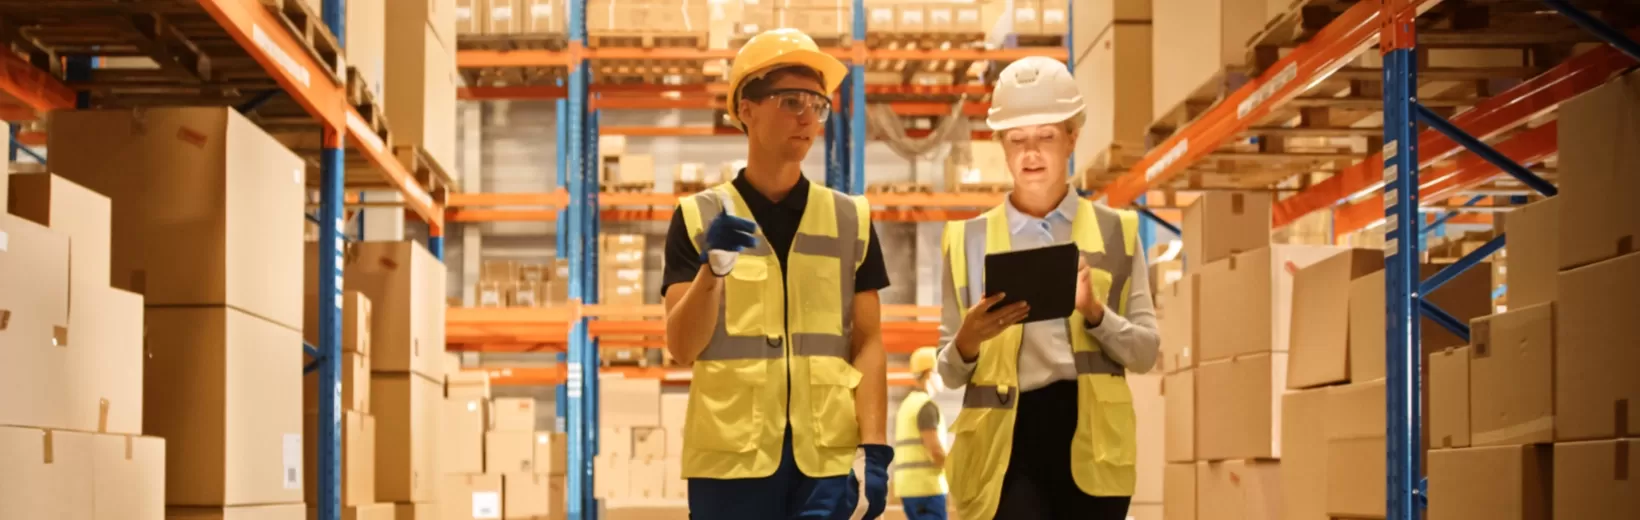 Workers in warehouse with checklist